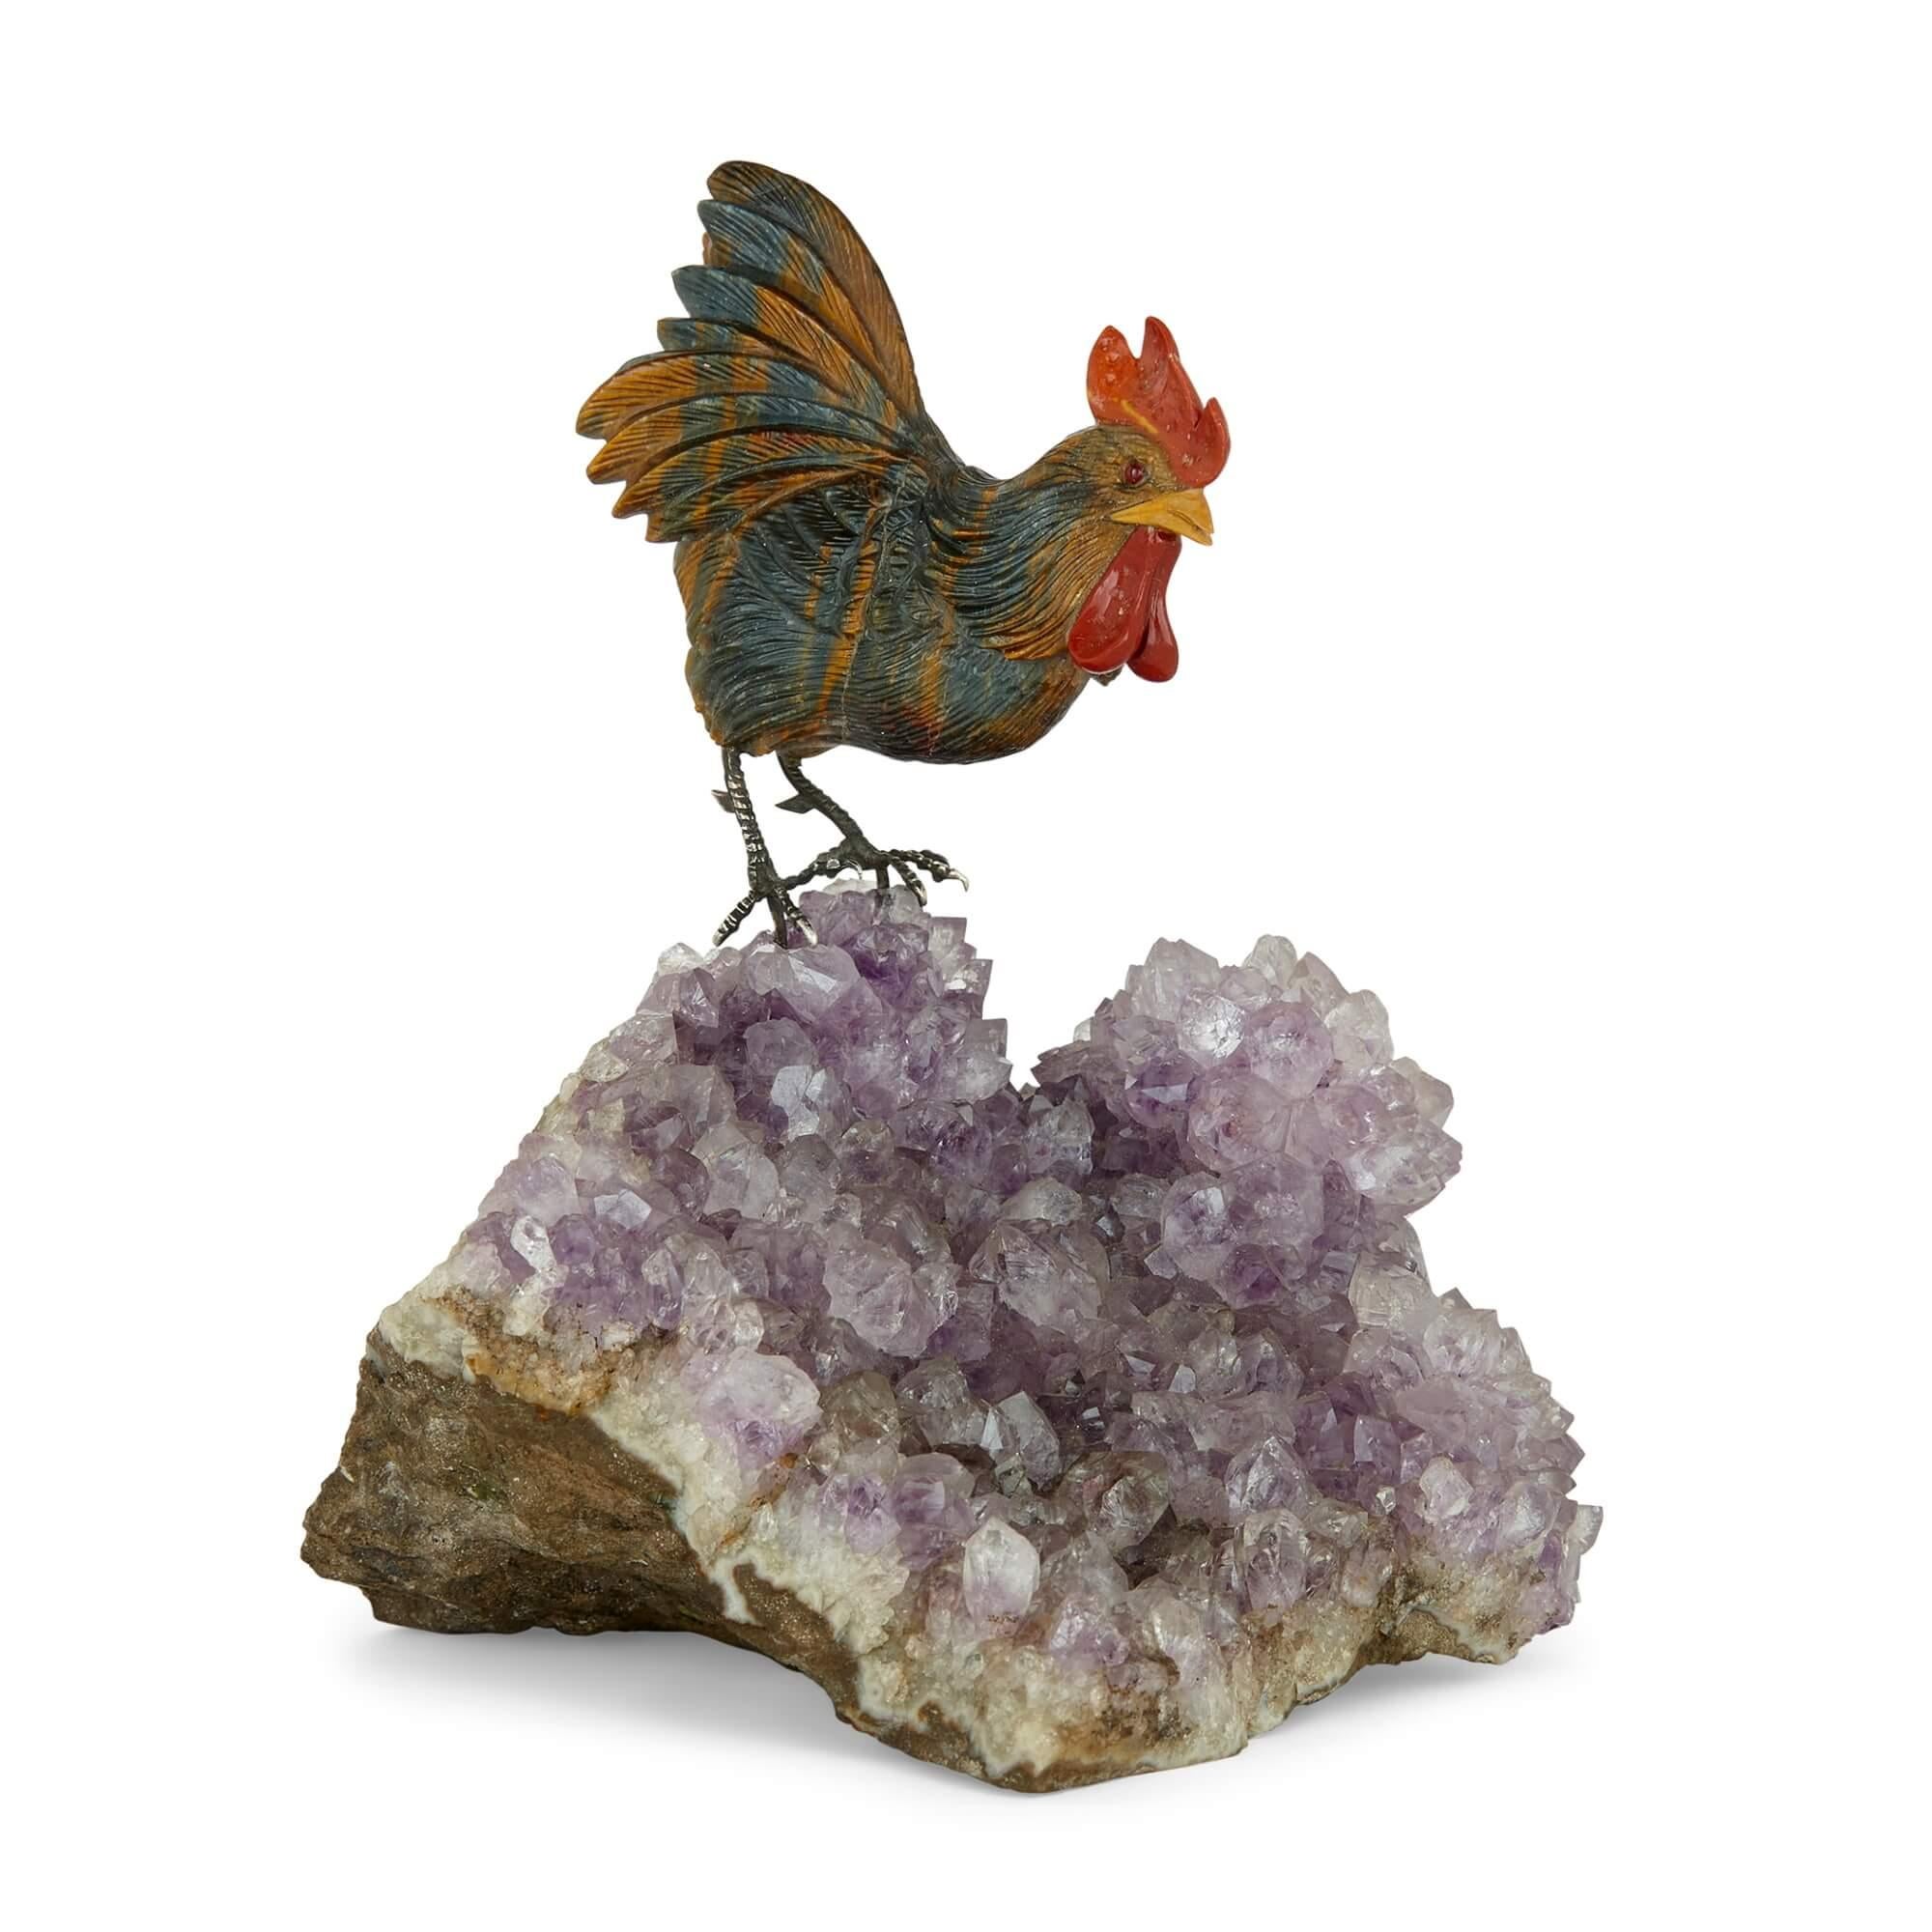 Semi-precious stone and silver model of a cockerel 
Continental, 20th Century 
Height 12cm, width 10cm, depth 10cm

This objet d’art is made from a selection of high quality materials. The cockerel, a symbol of good luck and prosperity is